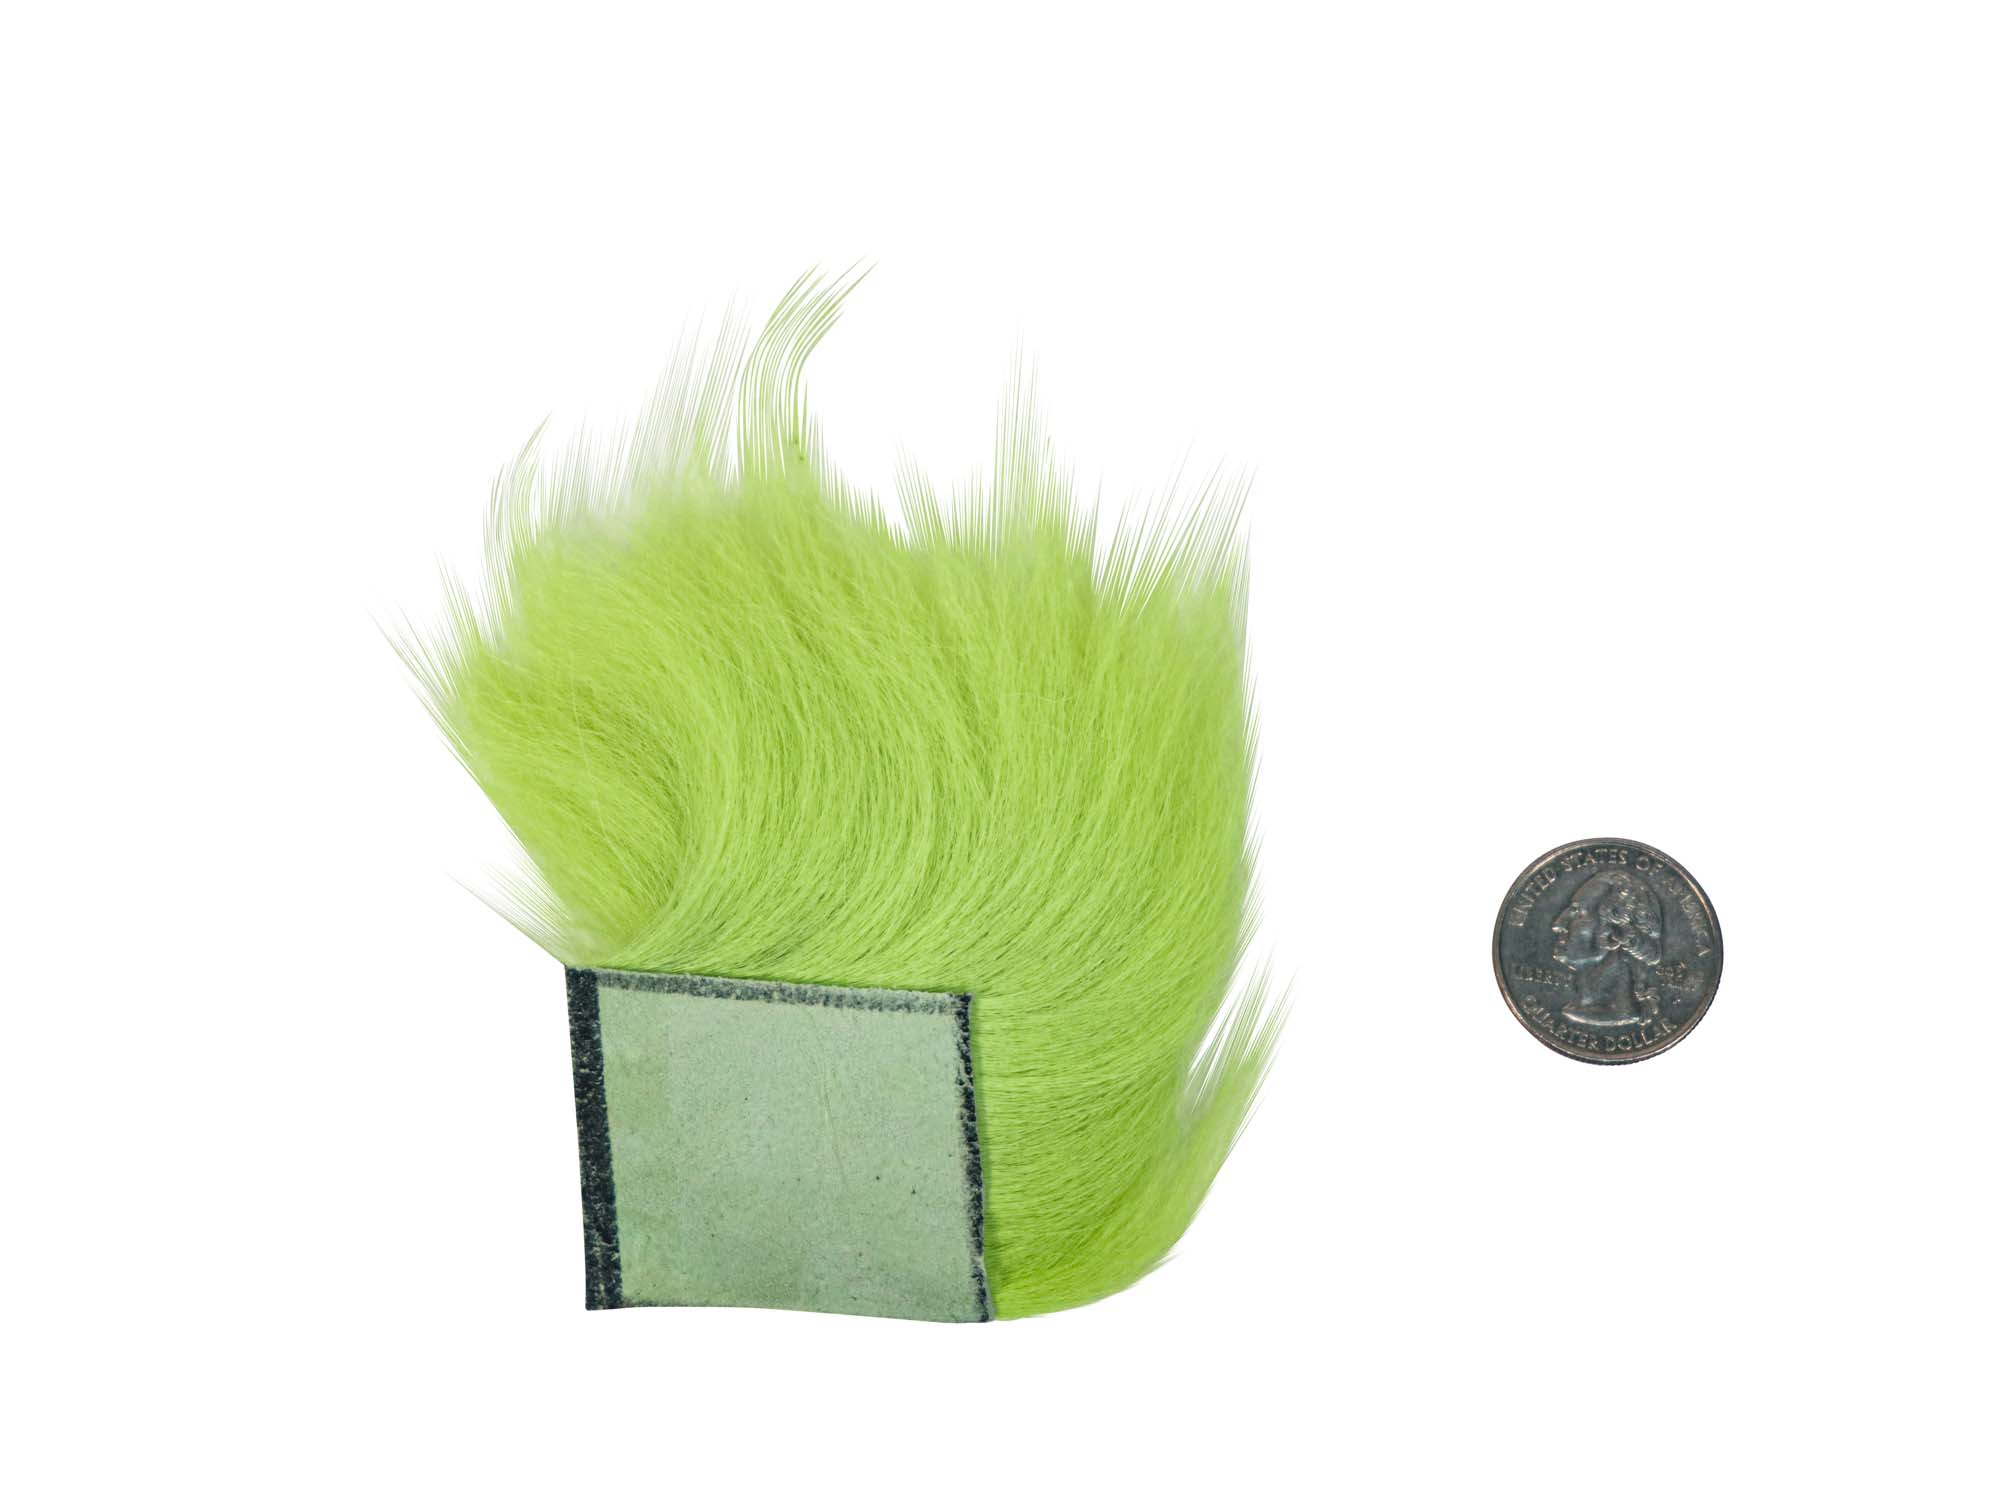 Dyed Arctic Runner Fly Fishing Piece: Lime Green - 1377-LG-AS (9UL4)